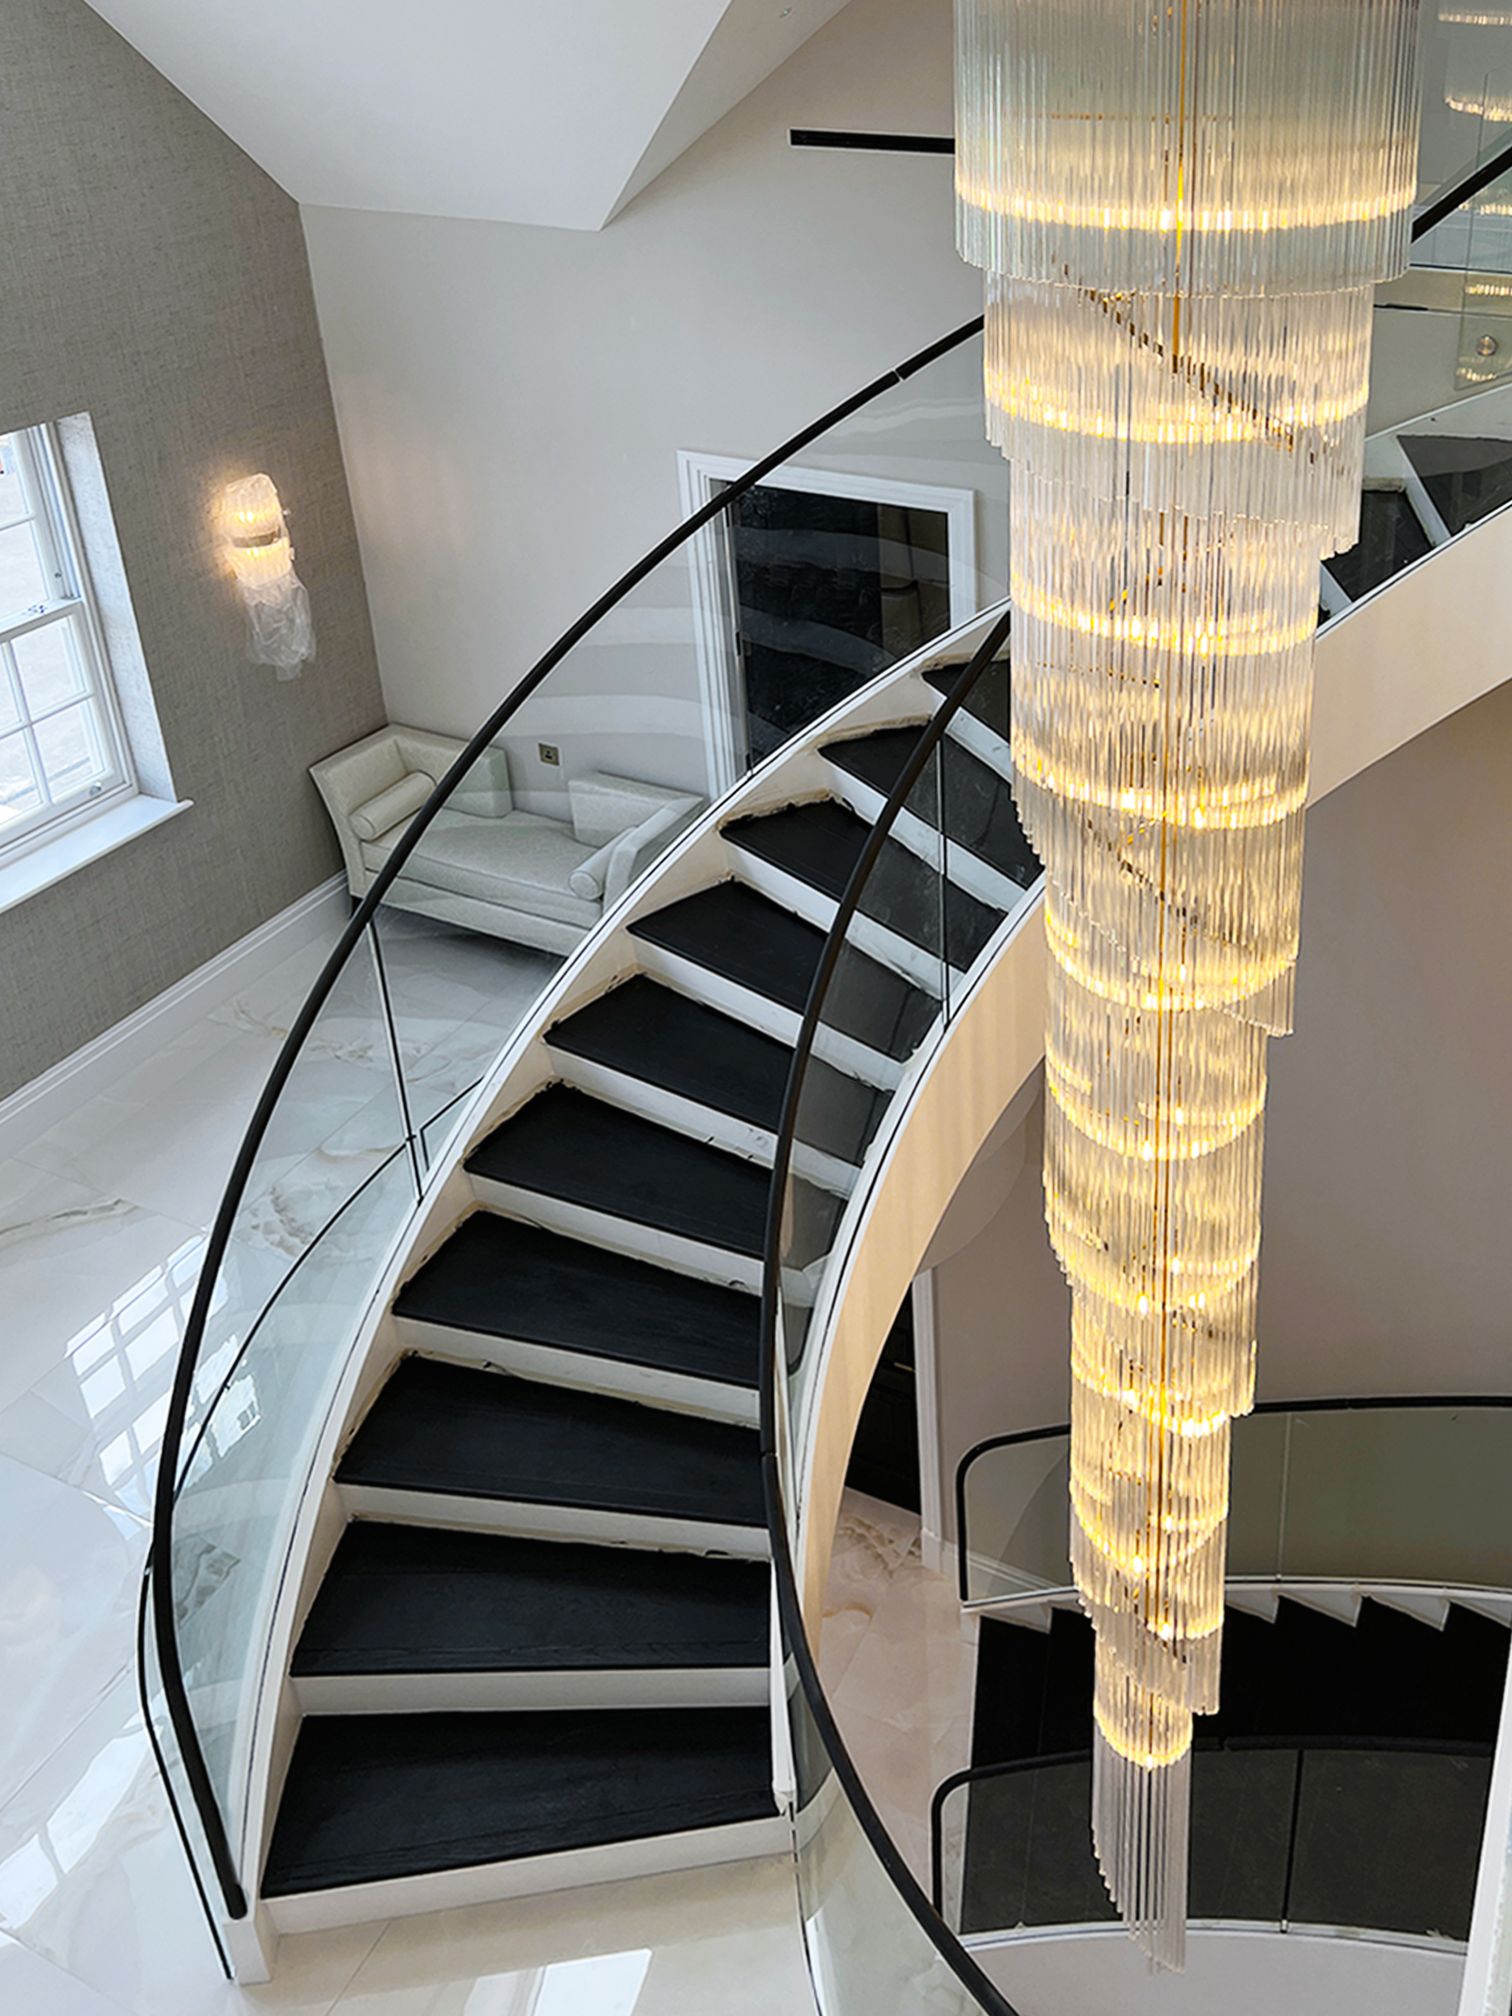 Bespoke Helical/Spiral staircase with curved Glass balustrade